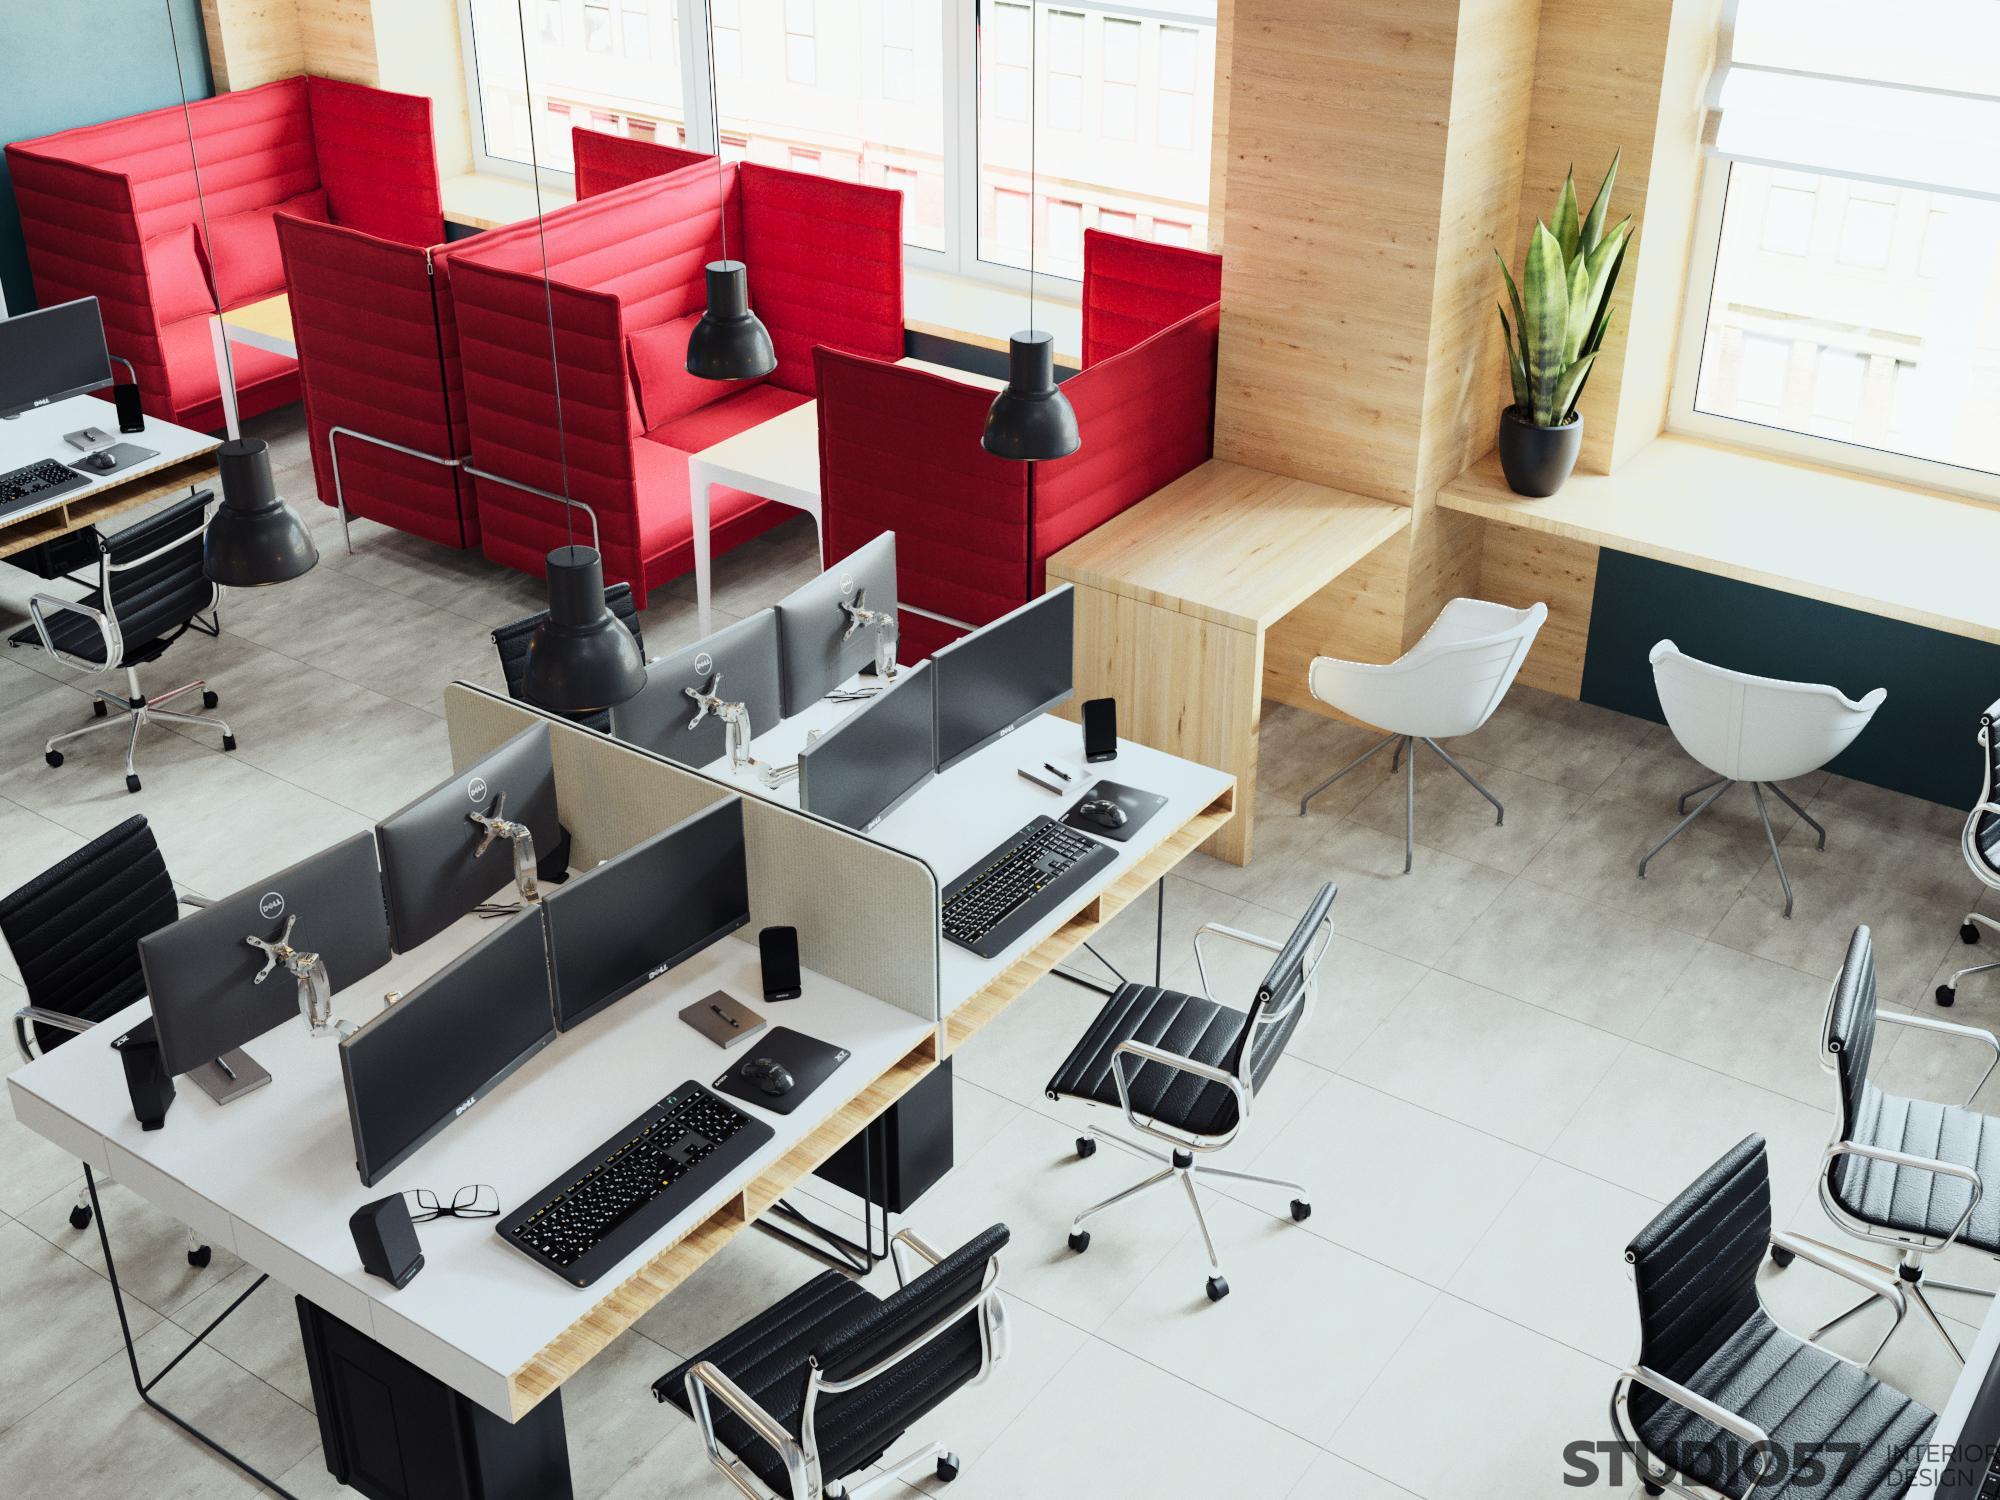 Design of workplaces in the office